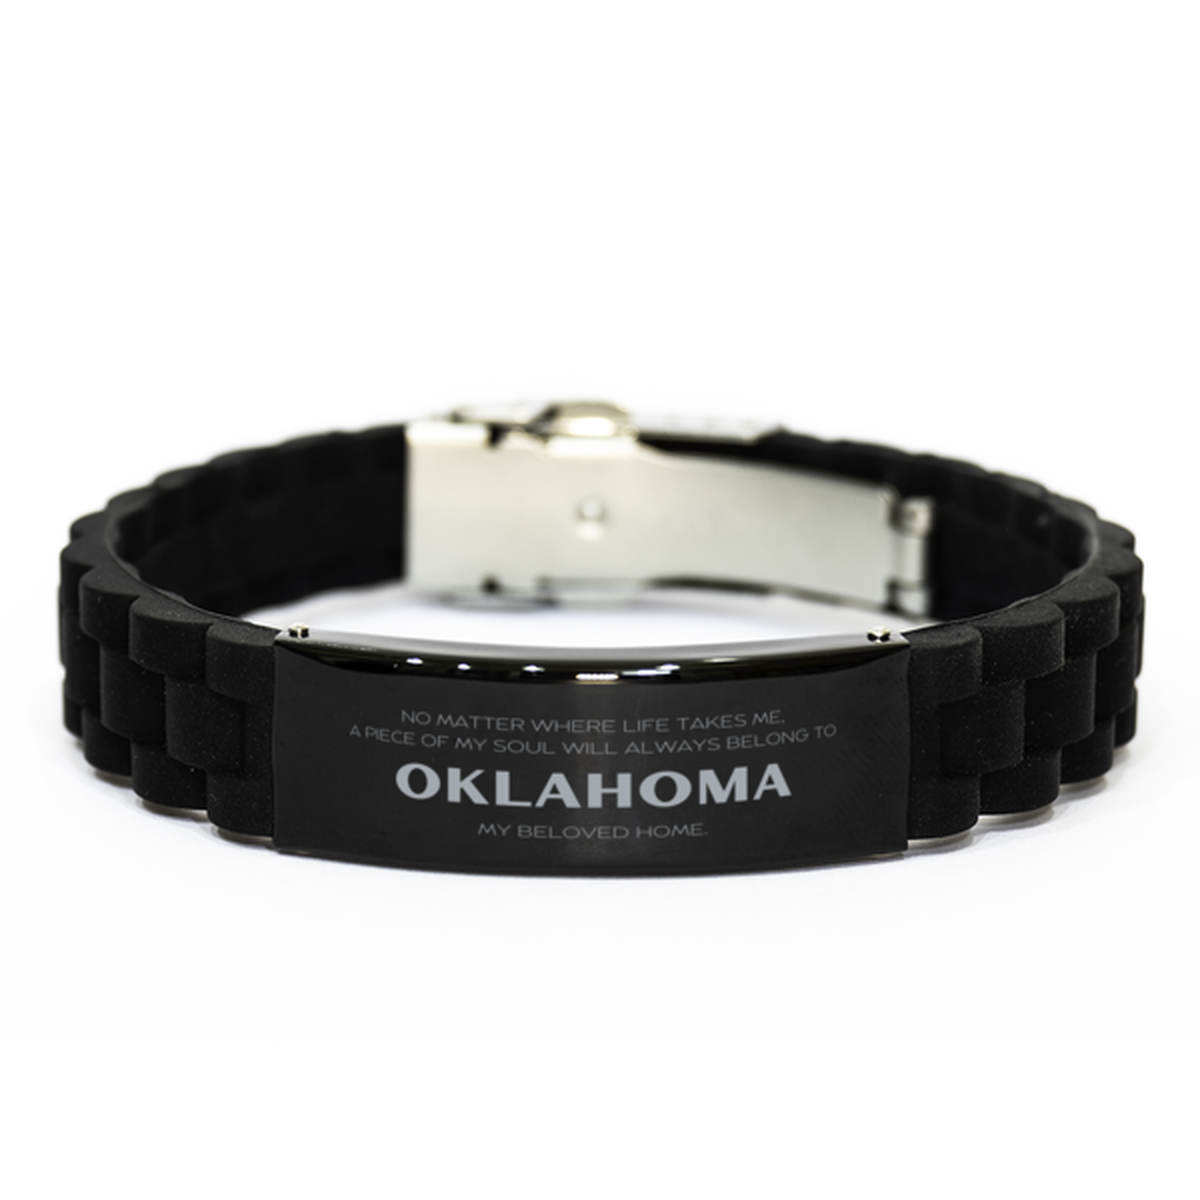 Love Oklahoma State Gifts, My soul will always belong to Oklahoma, Proud Black Glidelock Clasp Bracelet, Birthday Unique Gifts For Oklahoma Men, Women, Friends